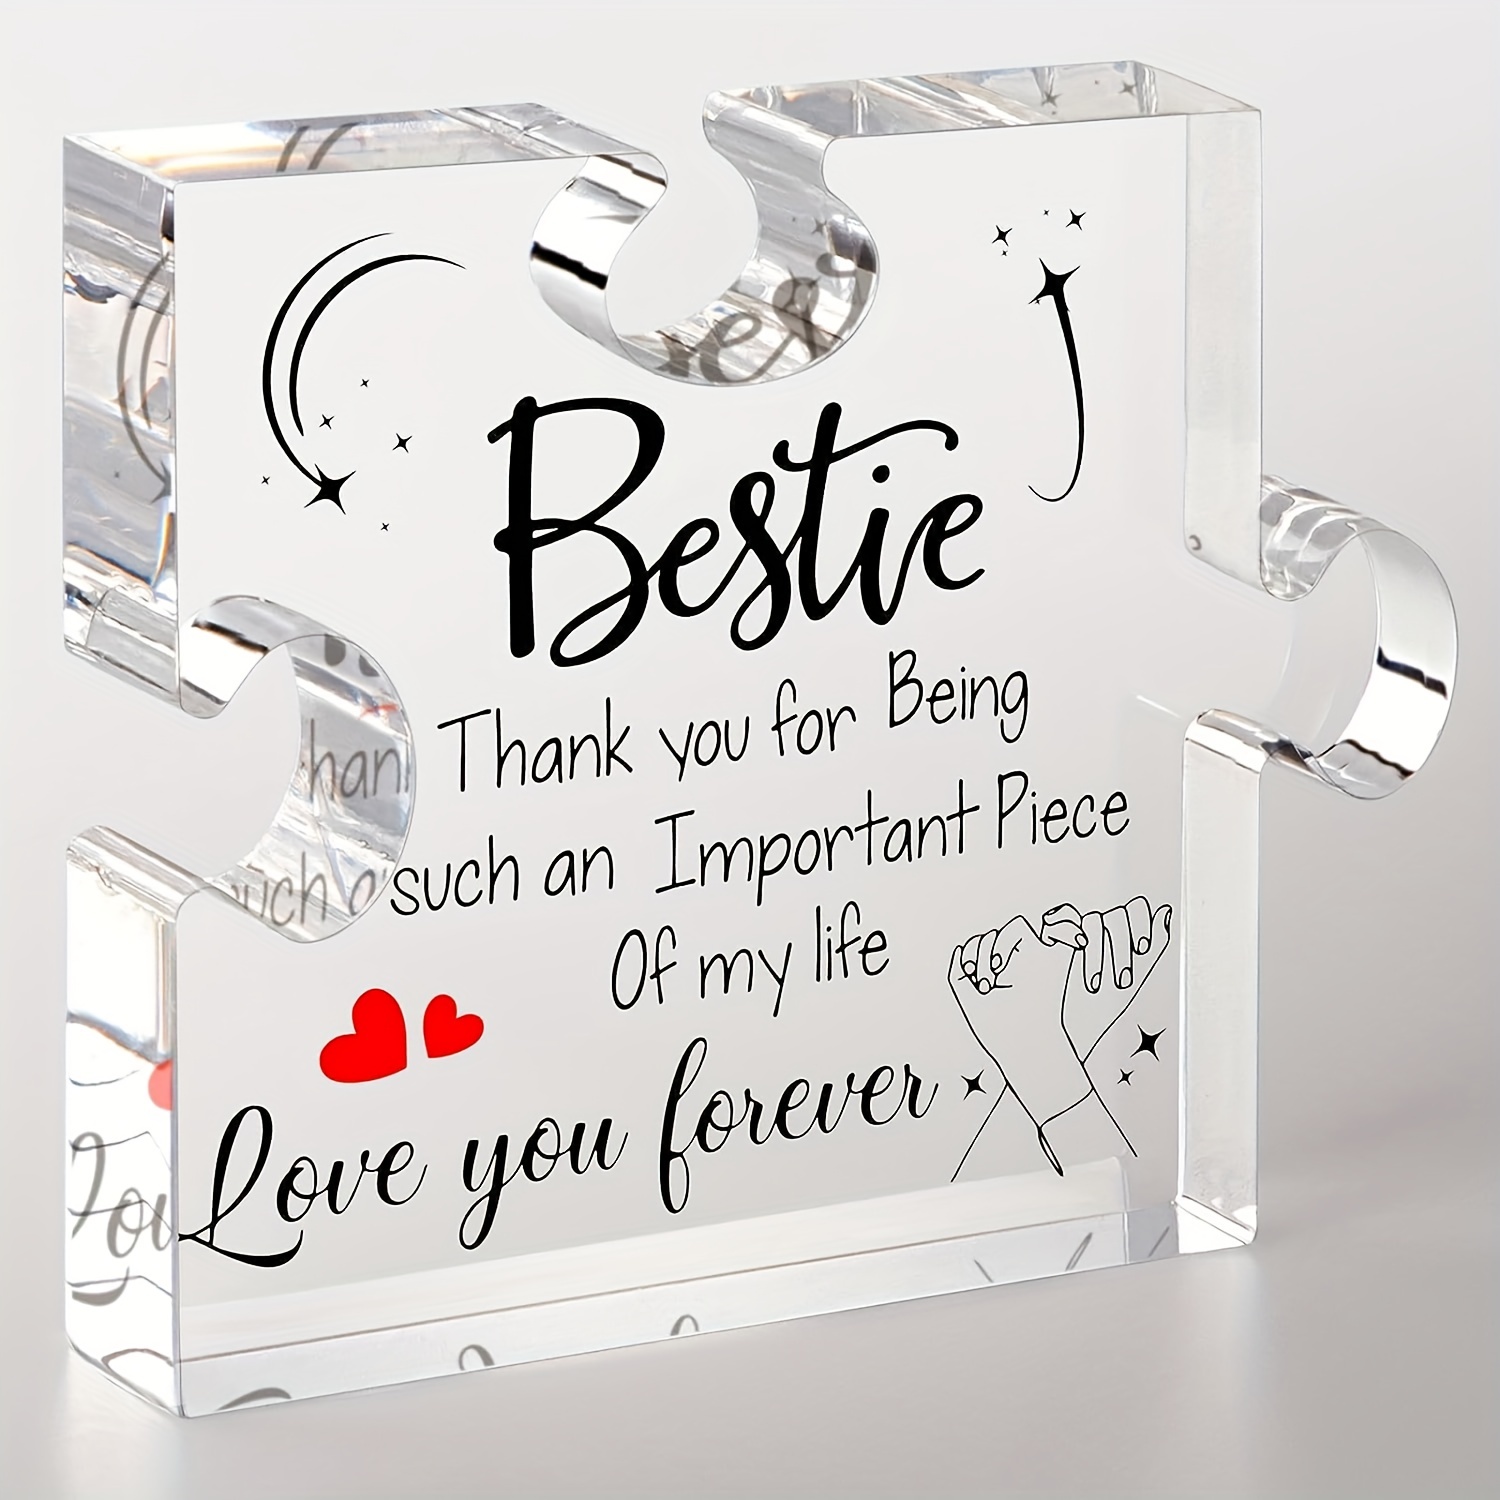 Friendship Gifts - Acrylic Block Puzzle Friendship Gift for Her - Long  Distance Relationship Gifts, Bestie Gifts